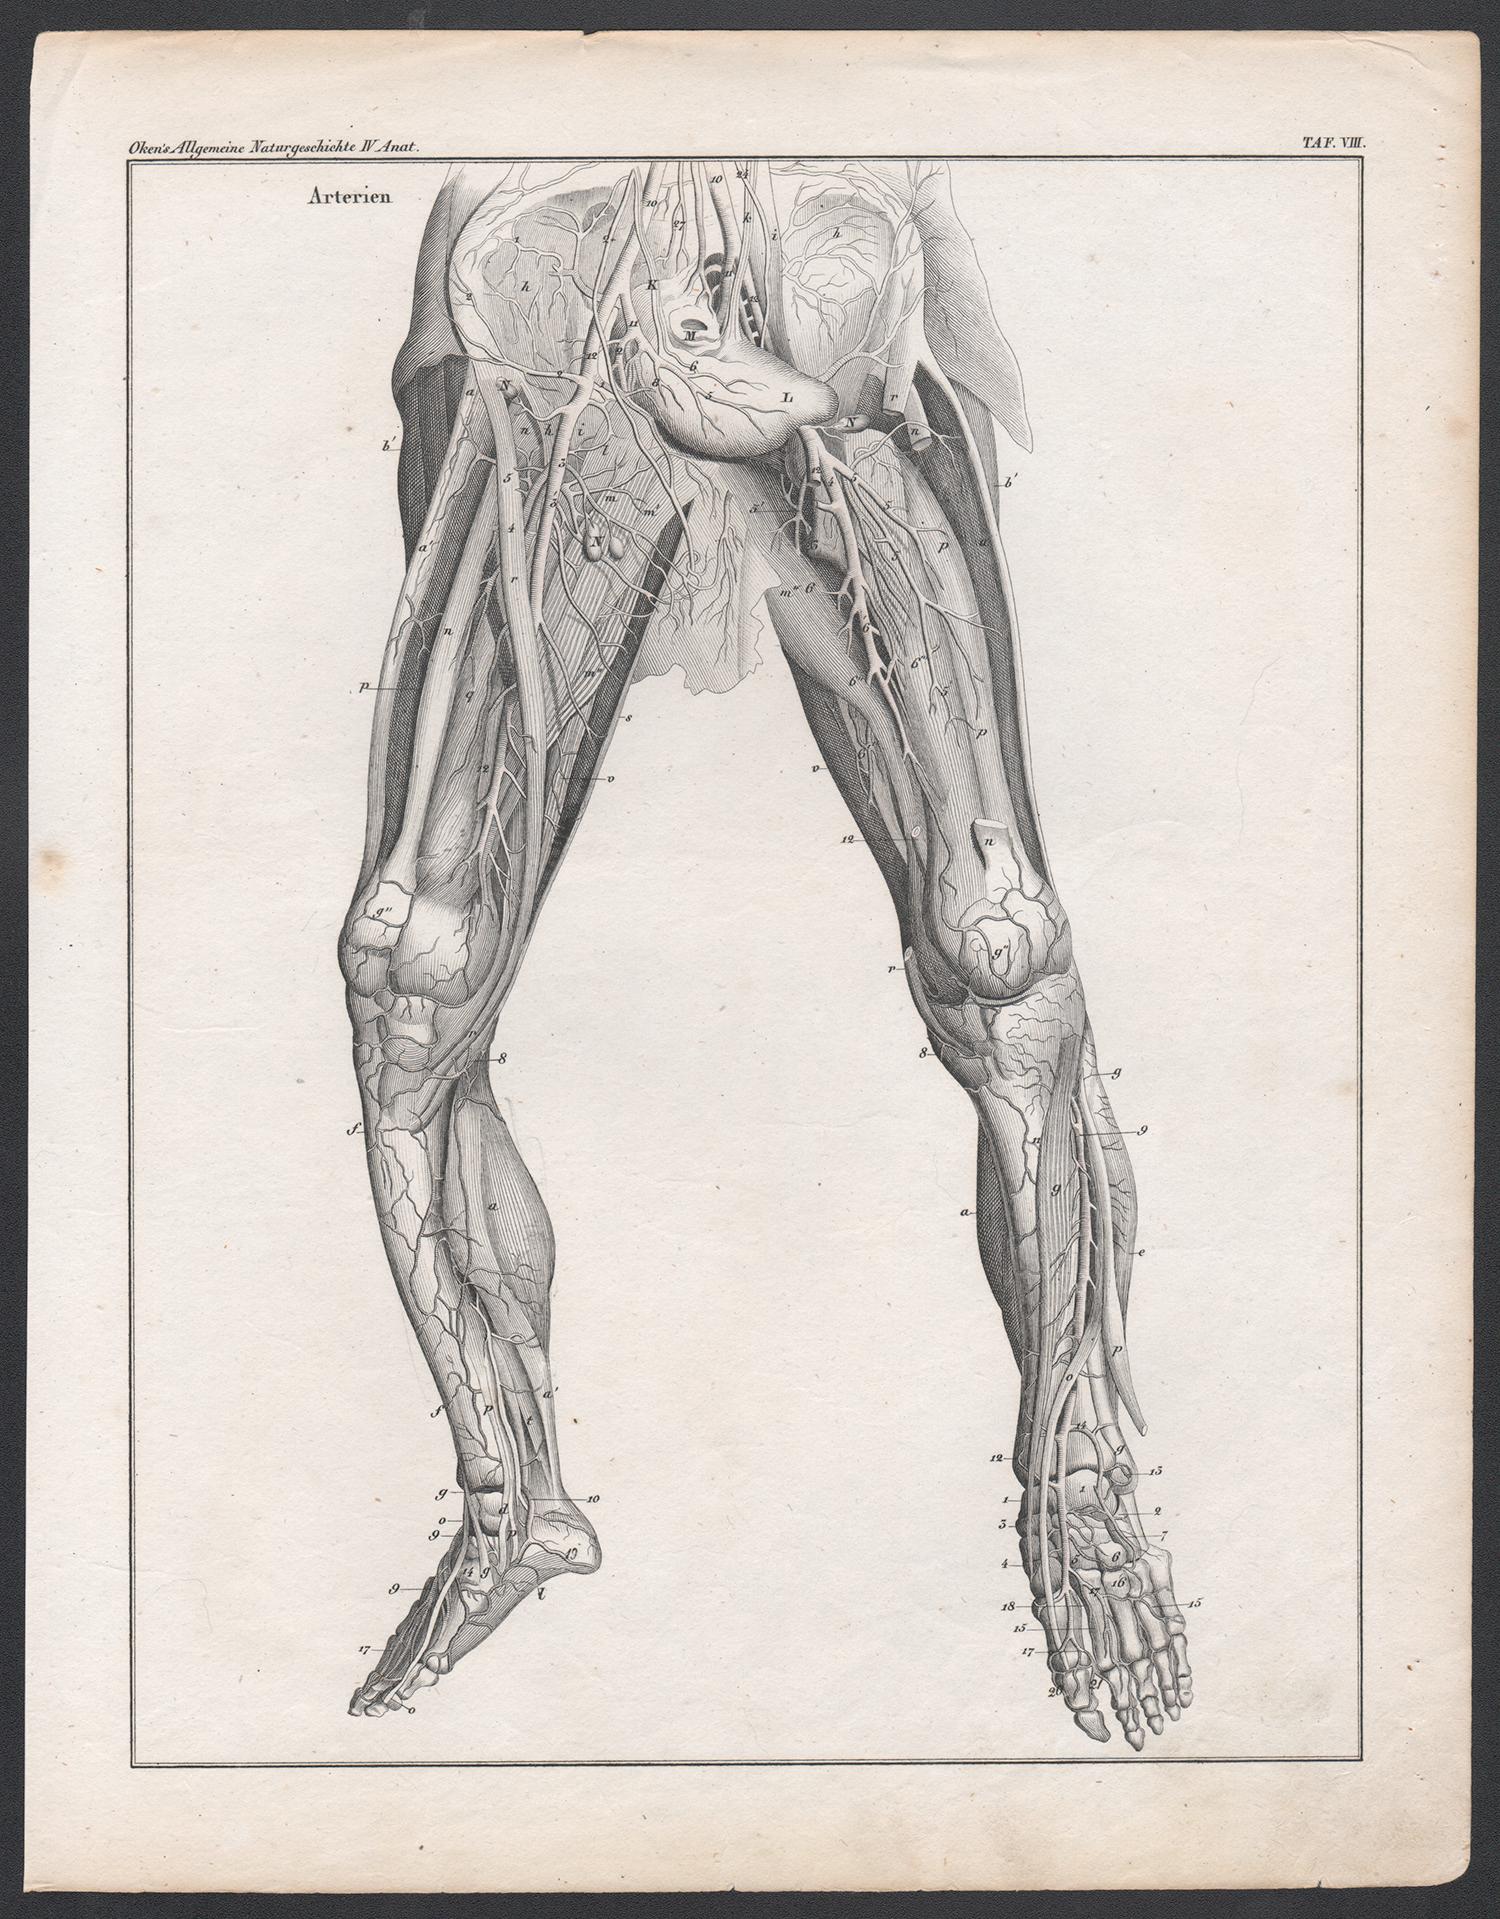 German anatomical medical antique lithograph - Veins in the Legs - Print by Unknown